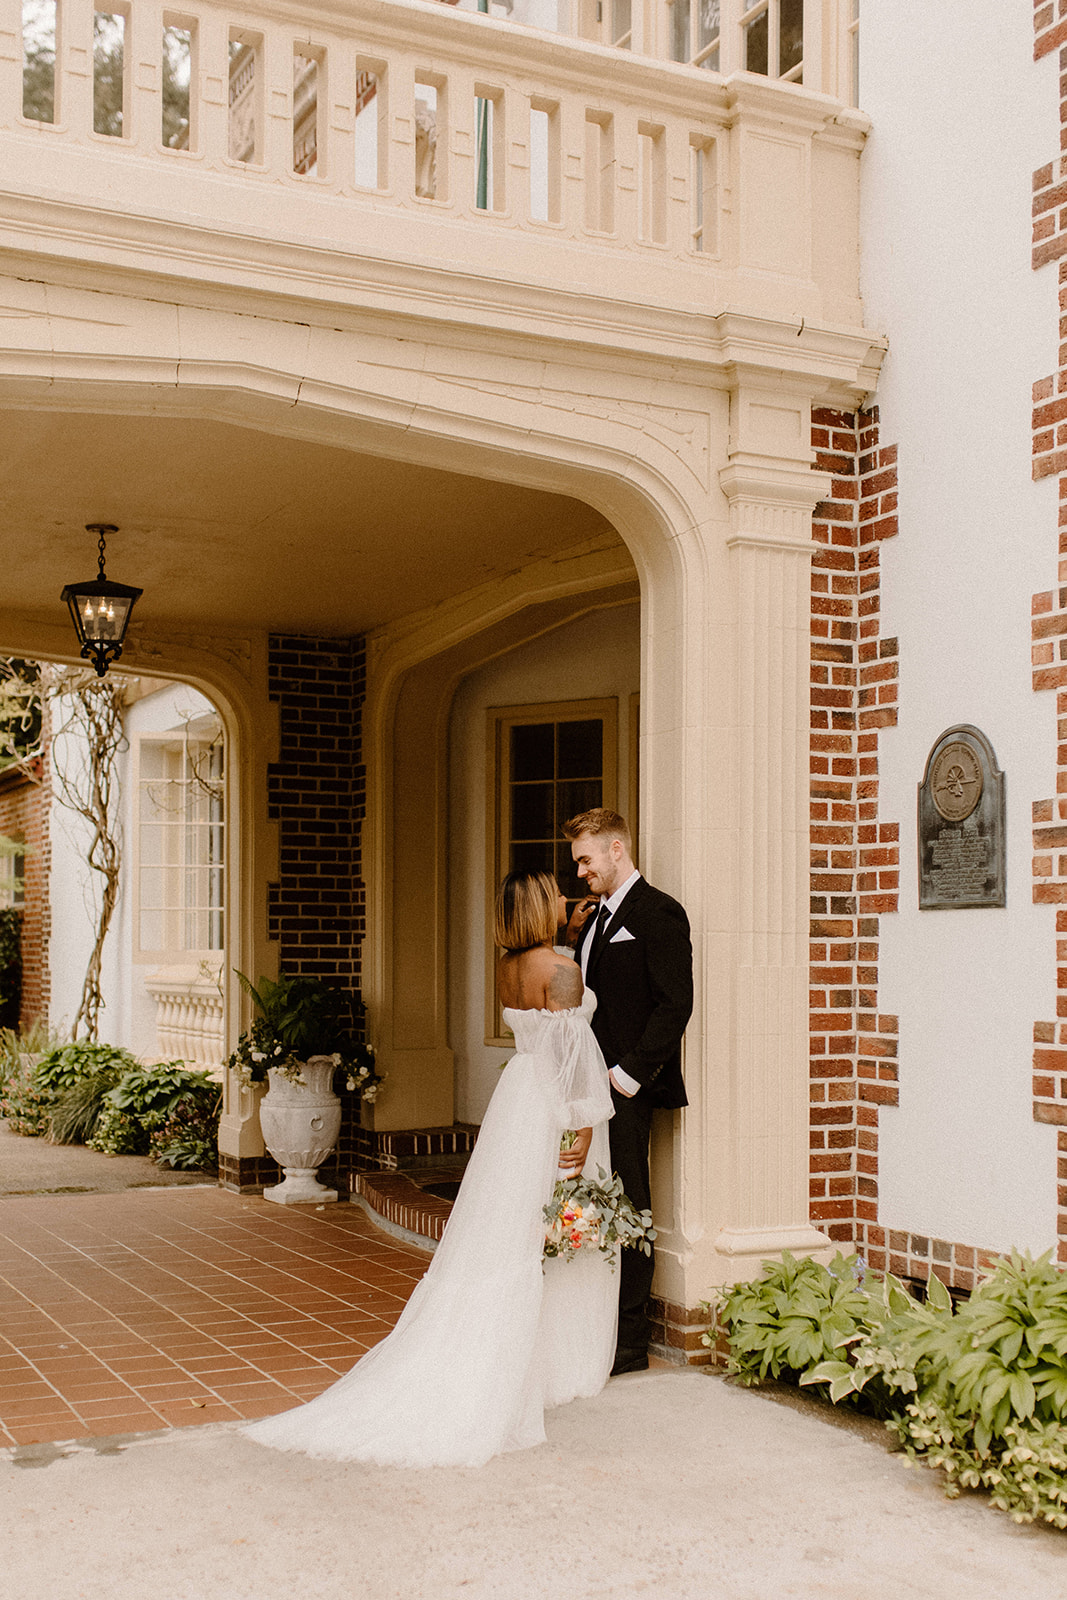 A Dreamy Wedding Day at Lairmont Manor